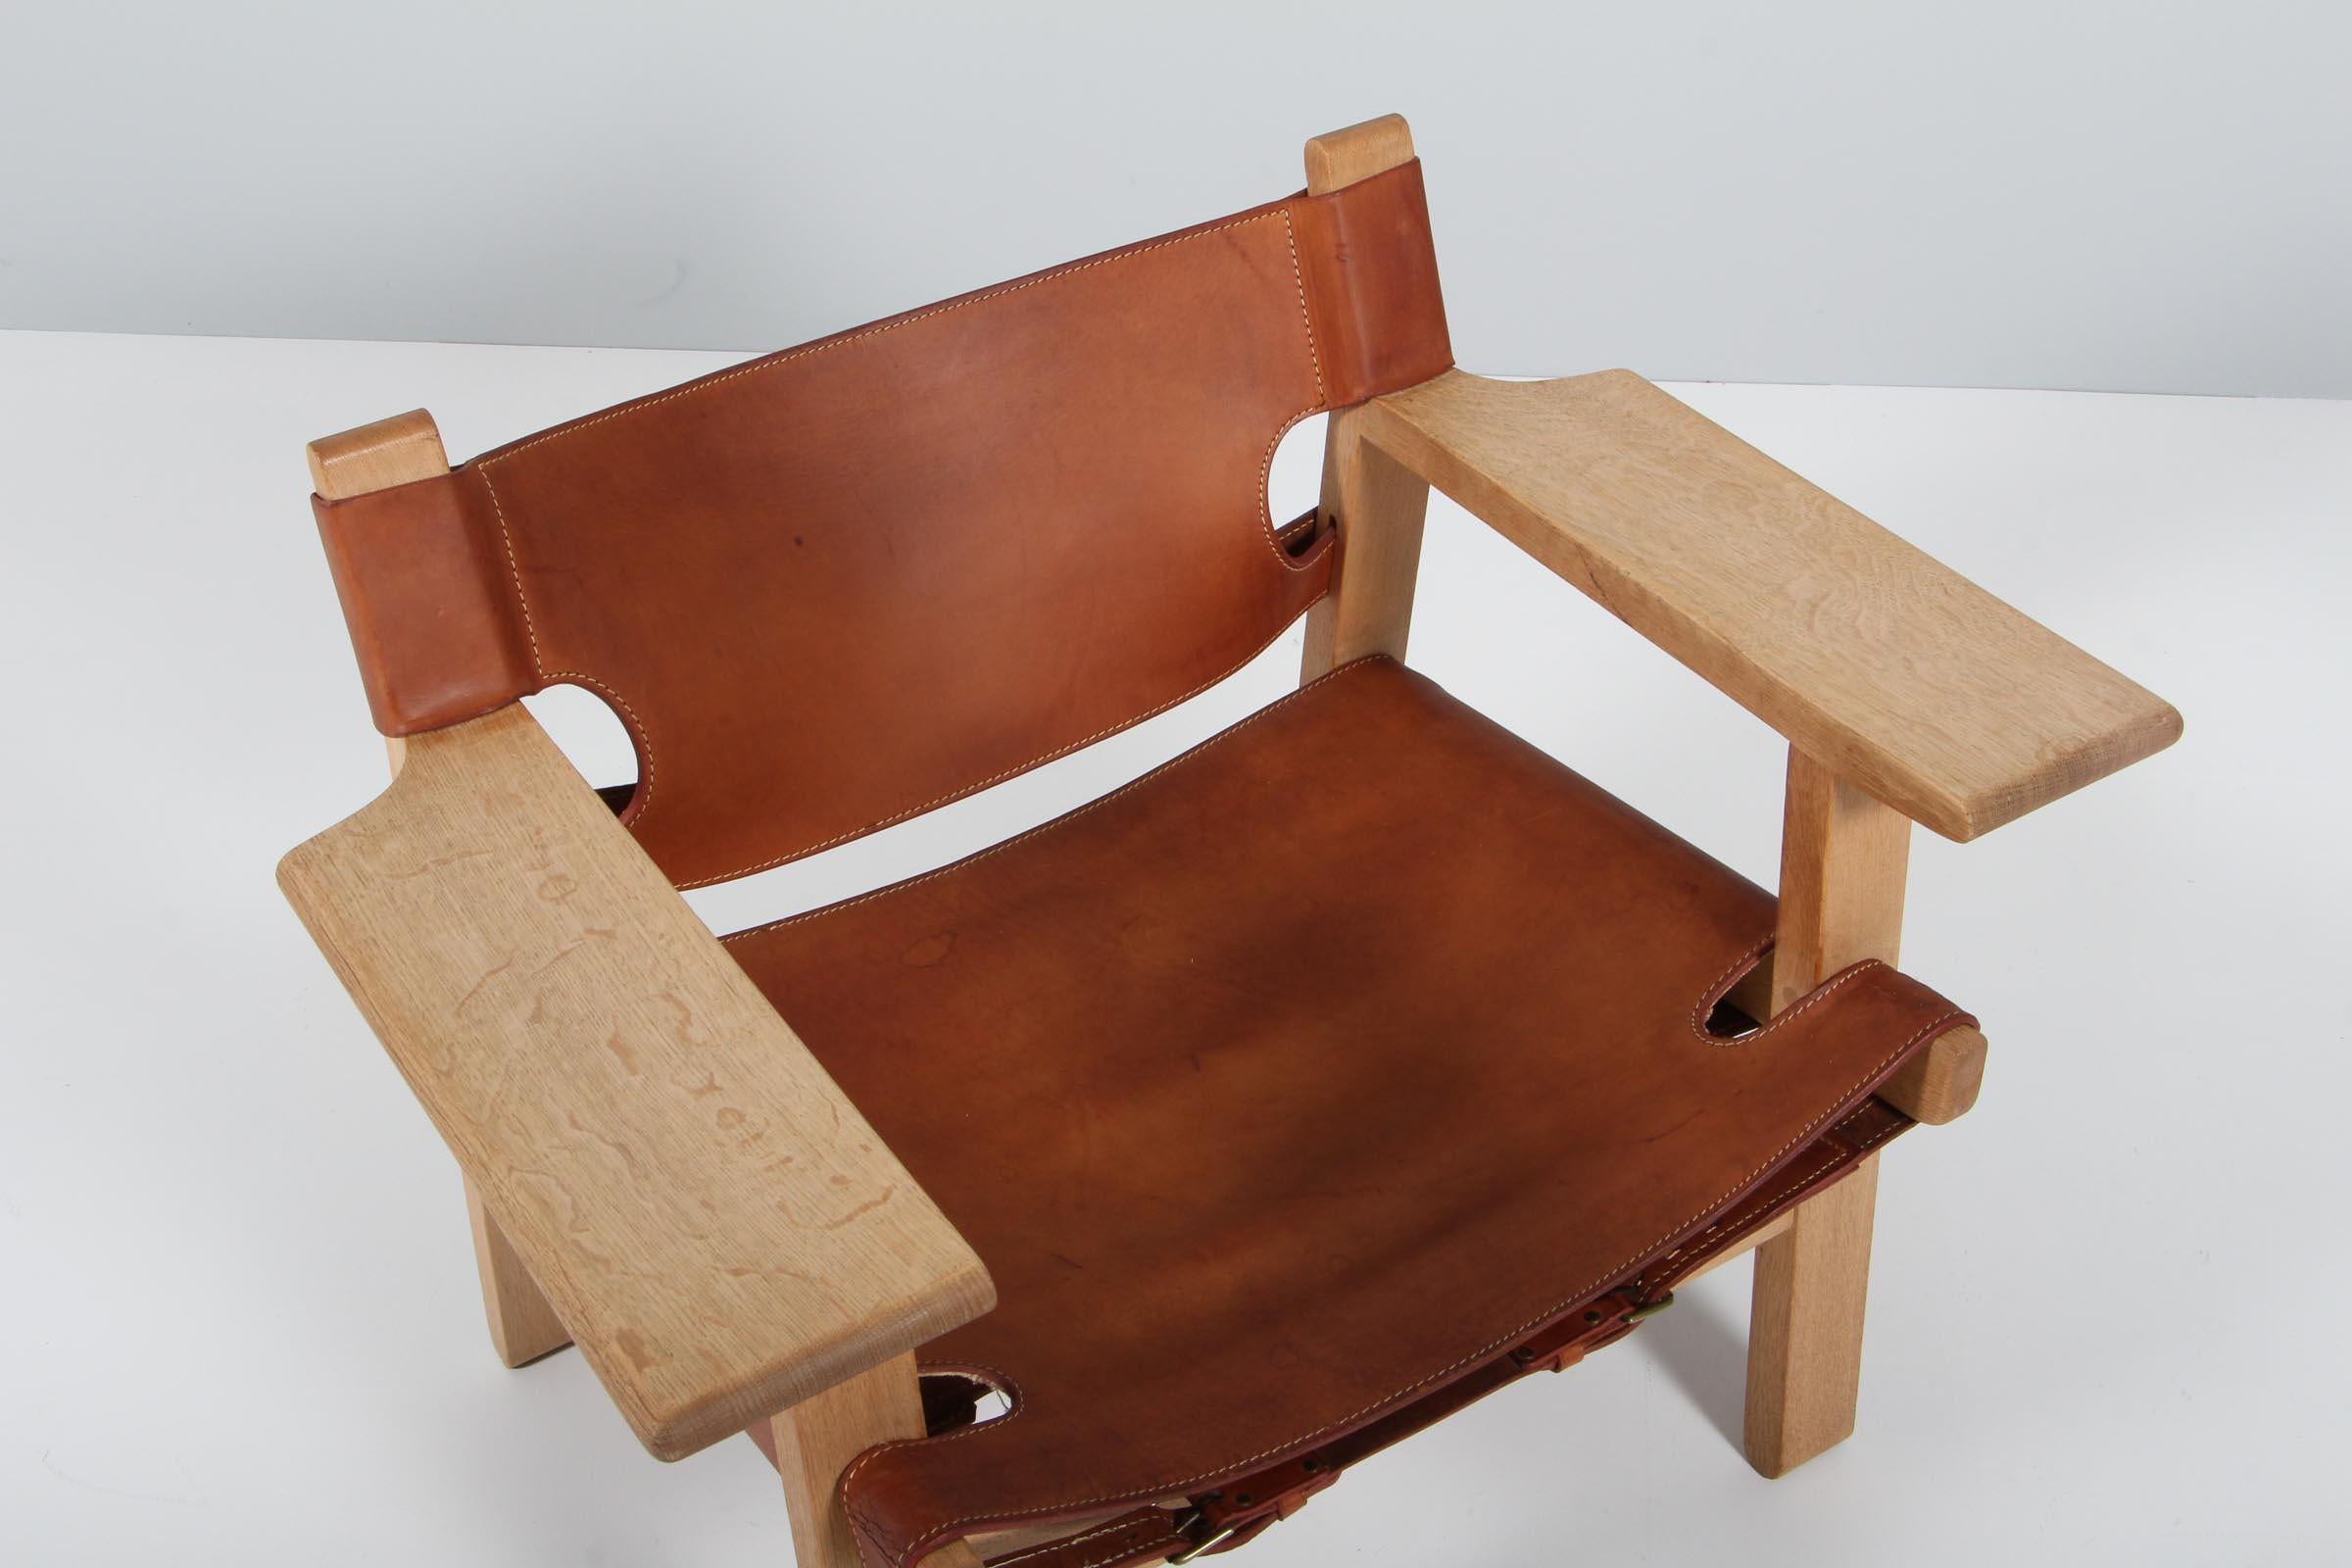 We have one of Borge Mogensen’s iconic Spanish Chairs for Fredericia Stolefabrik. Pair has been lovingly cared for, and is distinguished by it’s own age-appropriate characteristics. Gorgeously aged oak frames boast a stunning patina and finish.